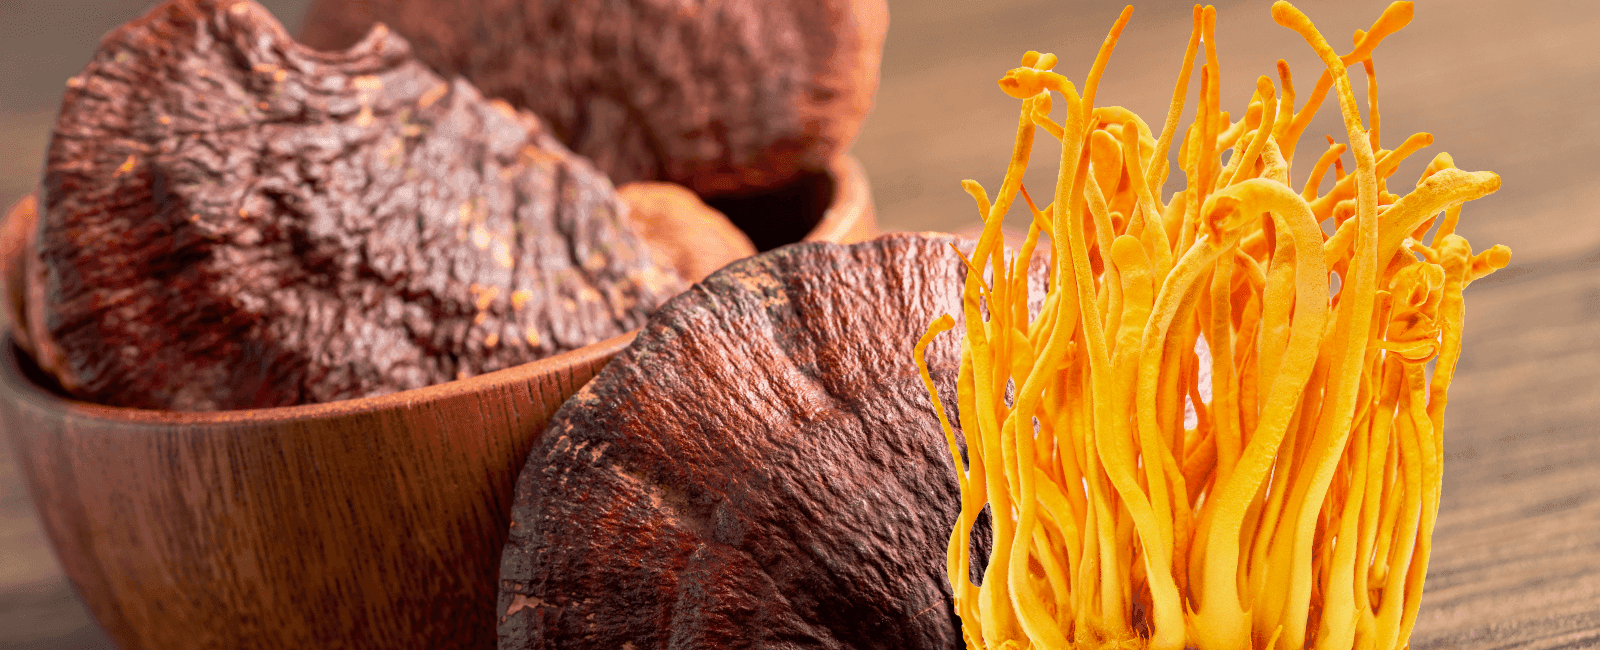 Mixture of Reishi and Cordyceps Extracts Found to Have Significant Antioxidant Capacity